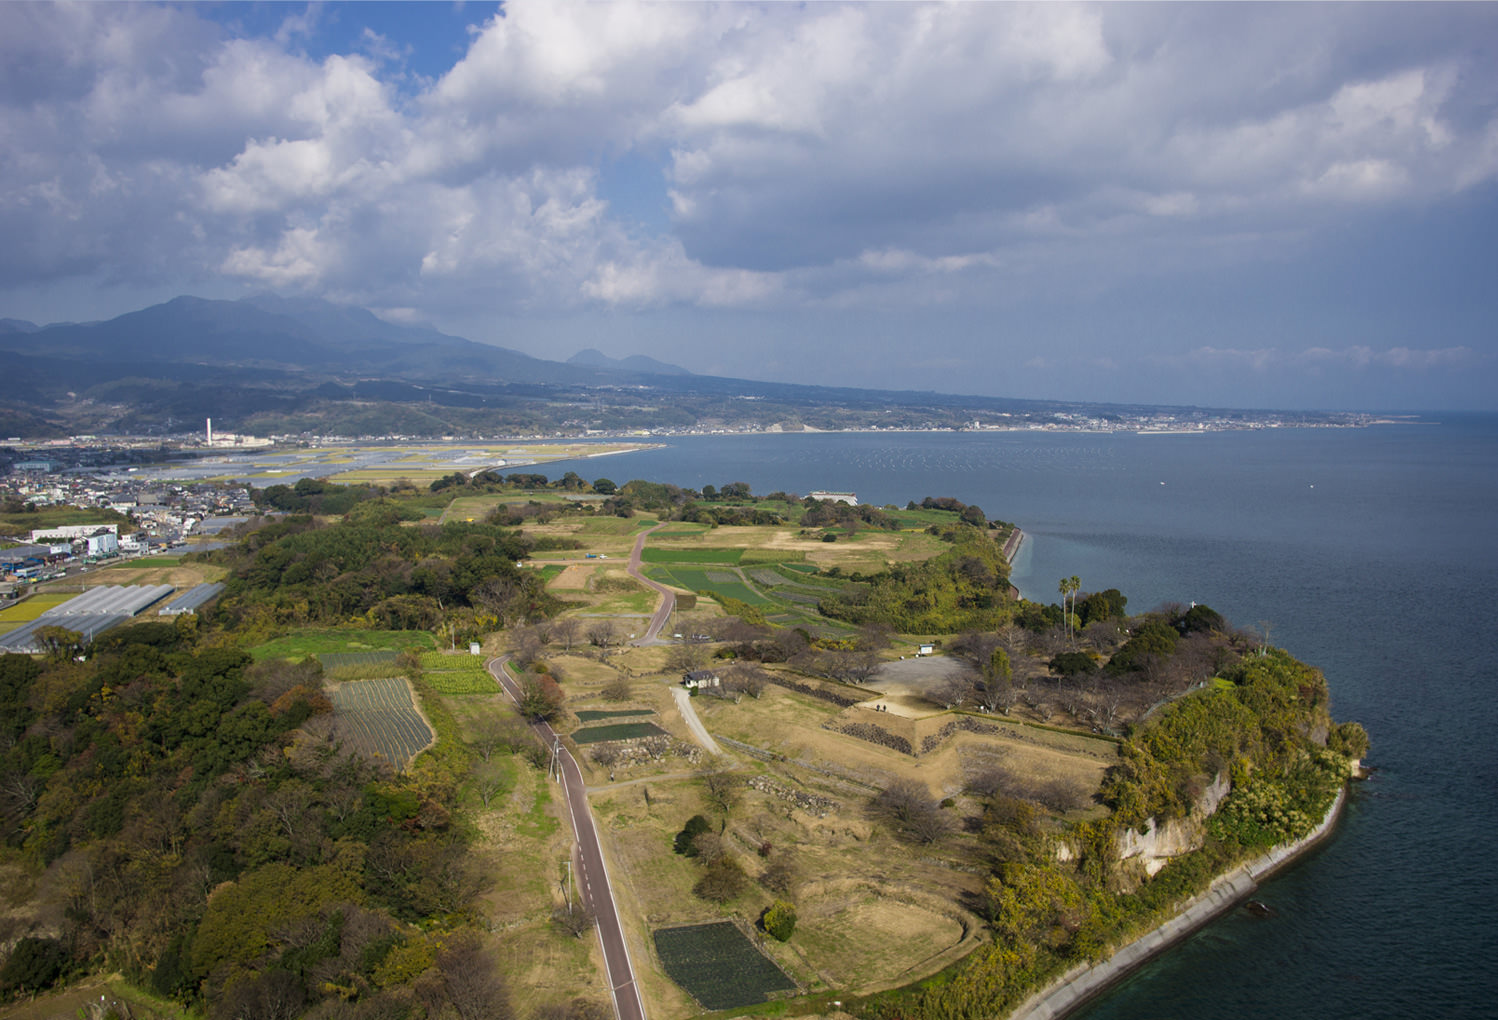 Looking toward the Shimabara area from above the ruins of Hara Castle